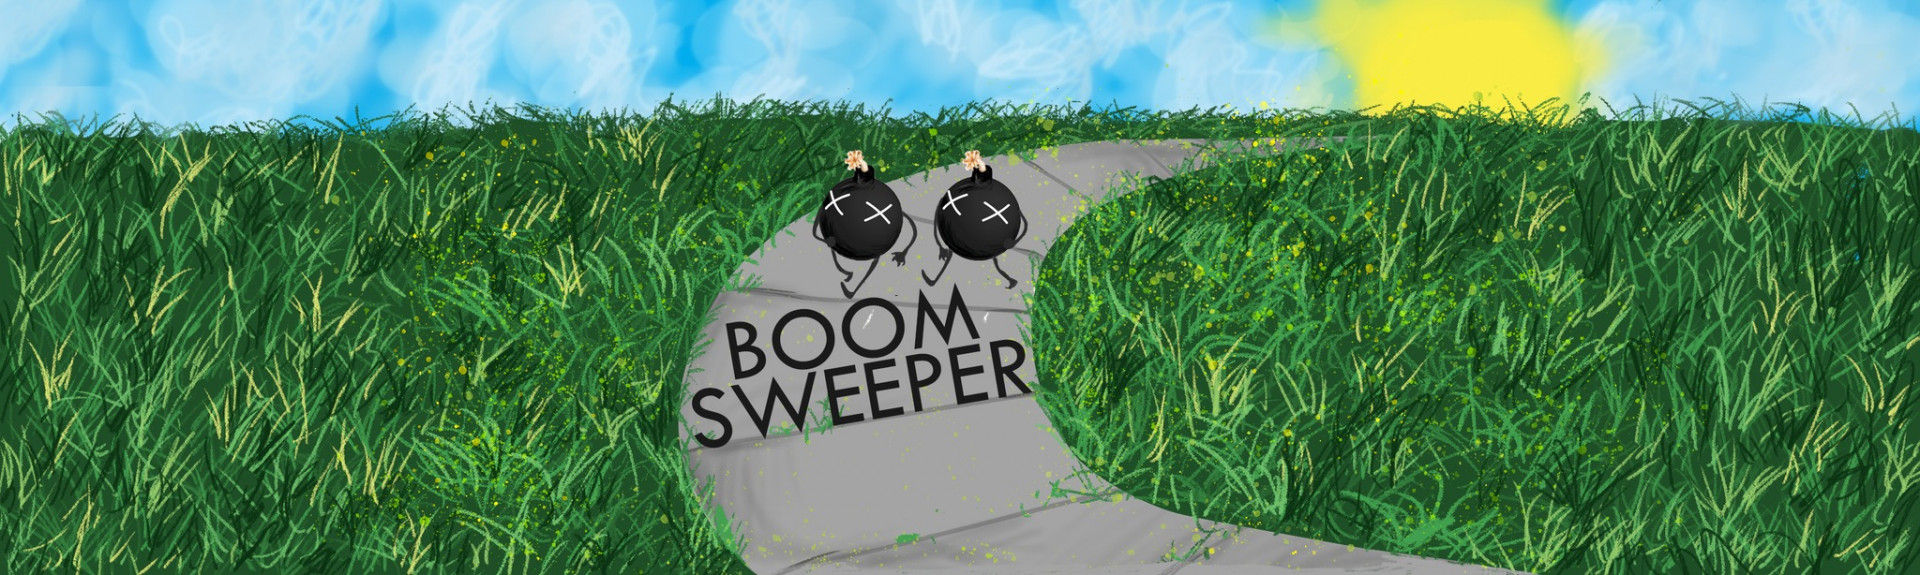 BoomSweeperVR